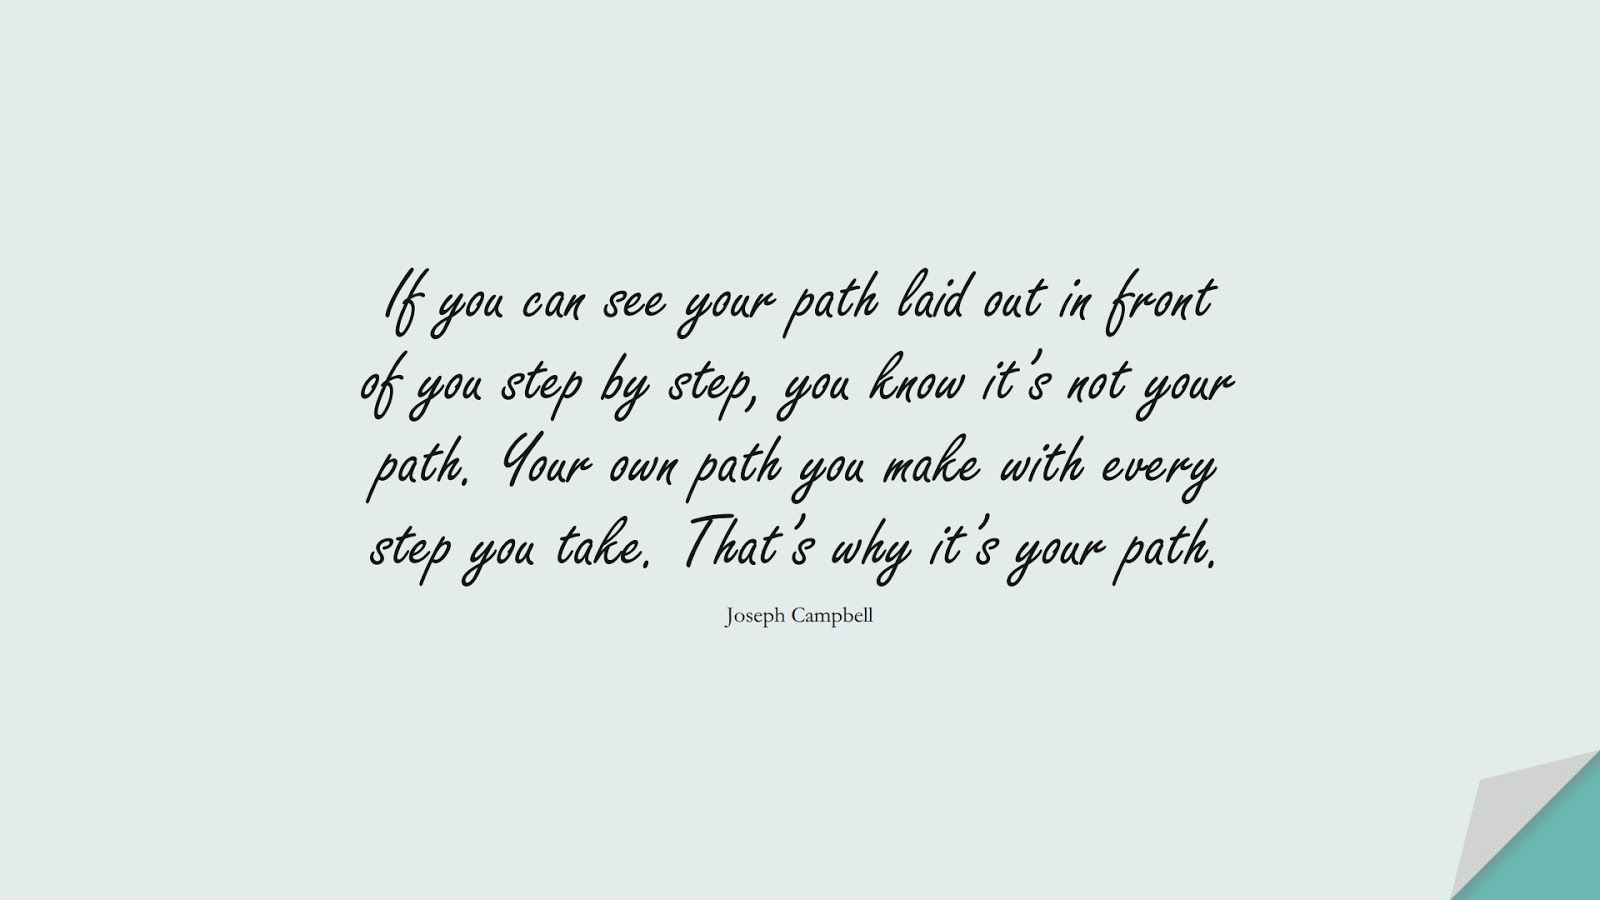 If you can see your path laid out in front of you step by step, you know it’s not your path. Your own path you make with every step you take. That’s why it’s your path. (Joseph Campbell);  #BeYourselfQuotes